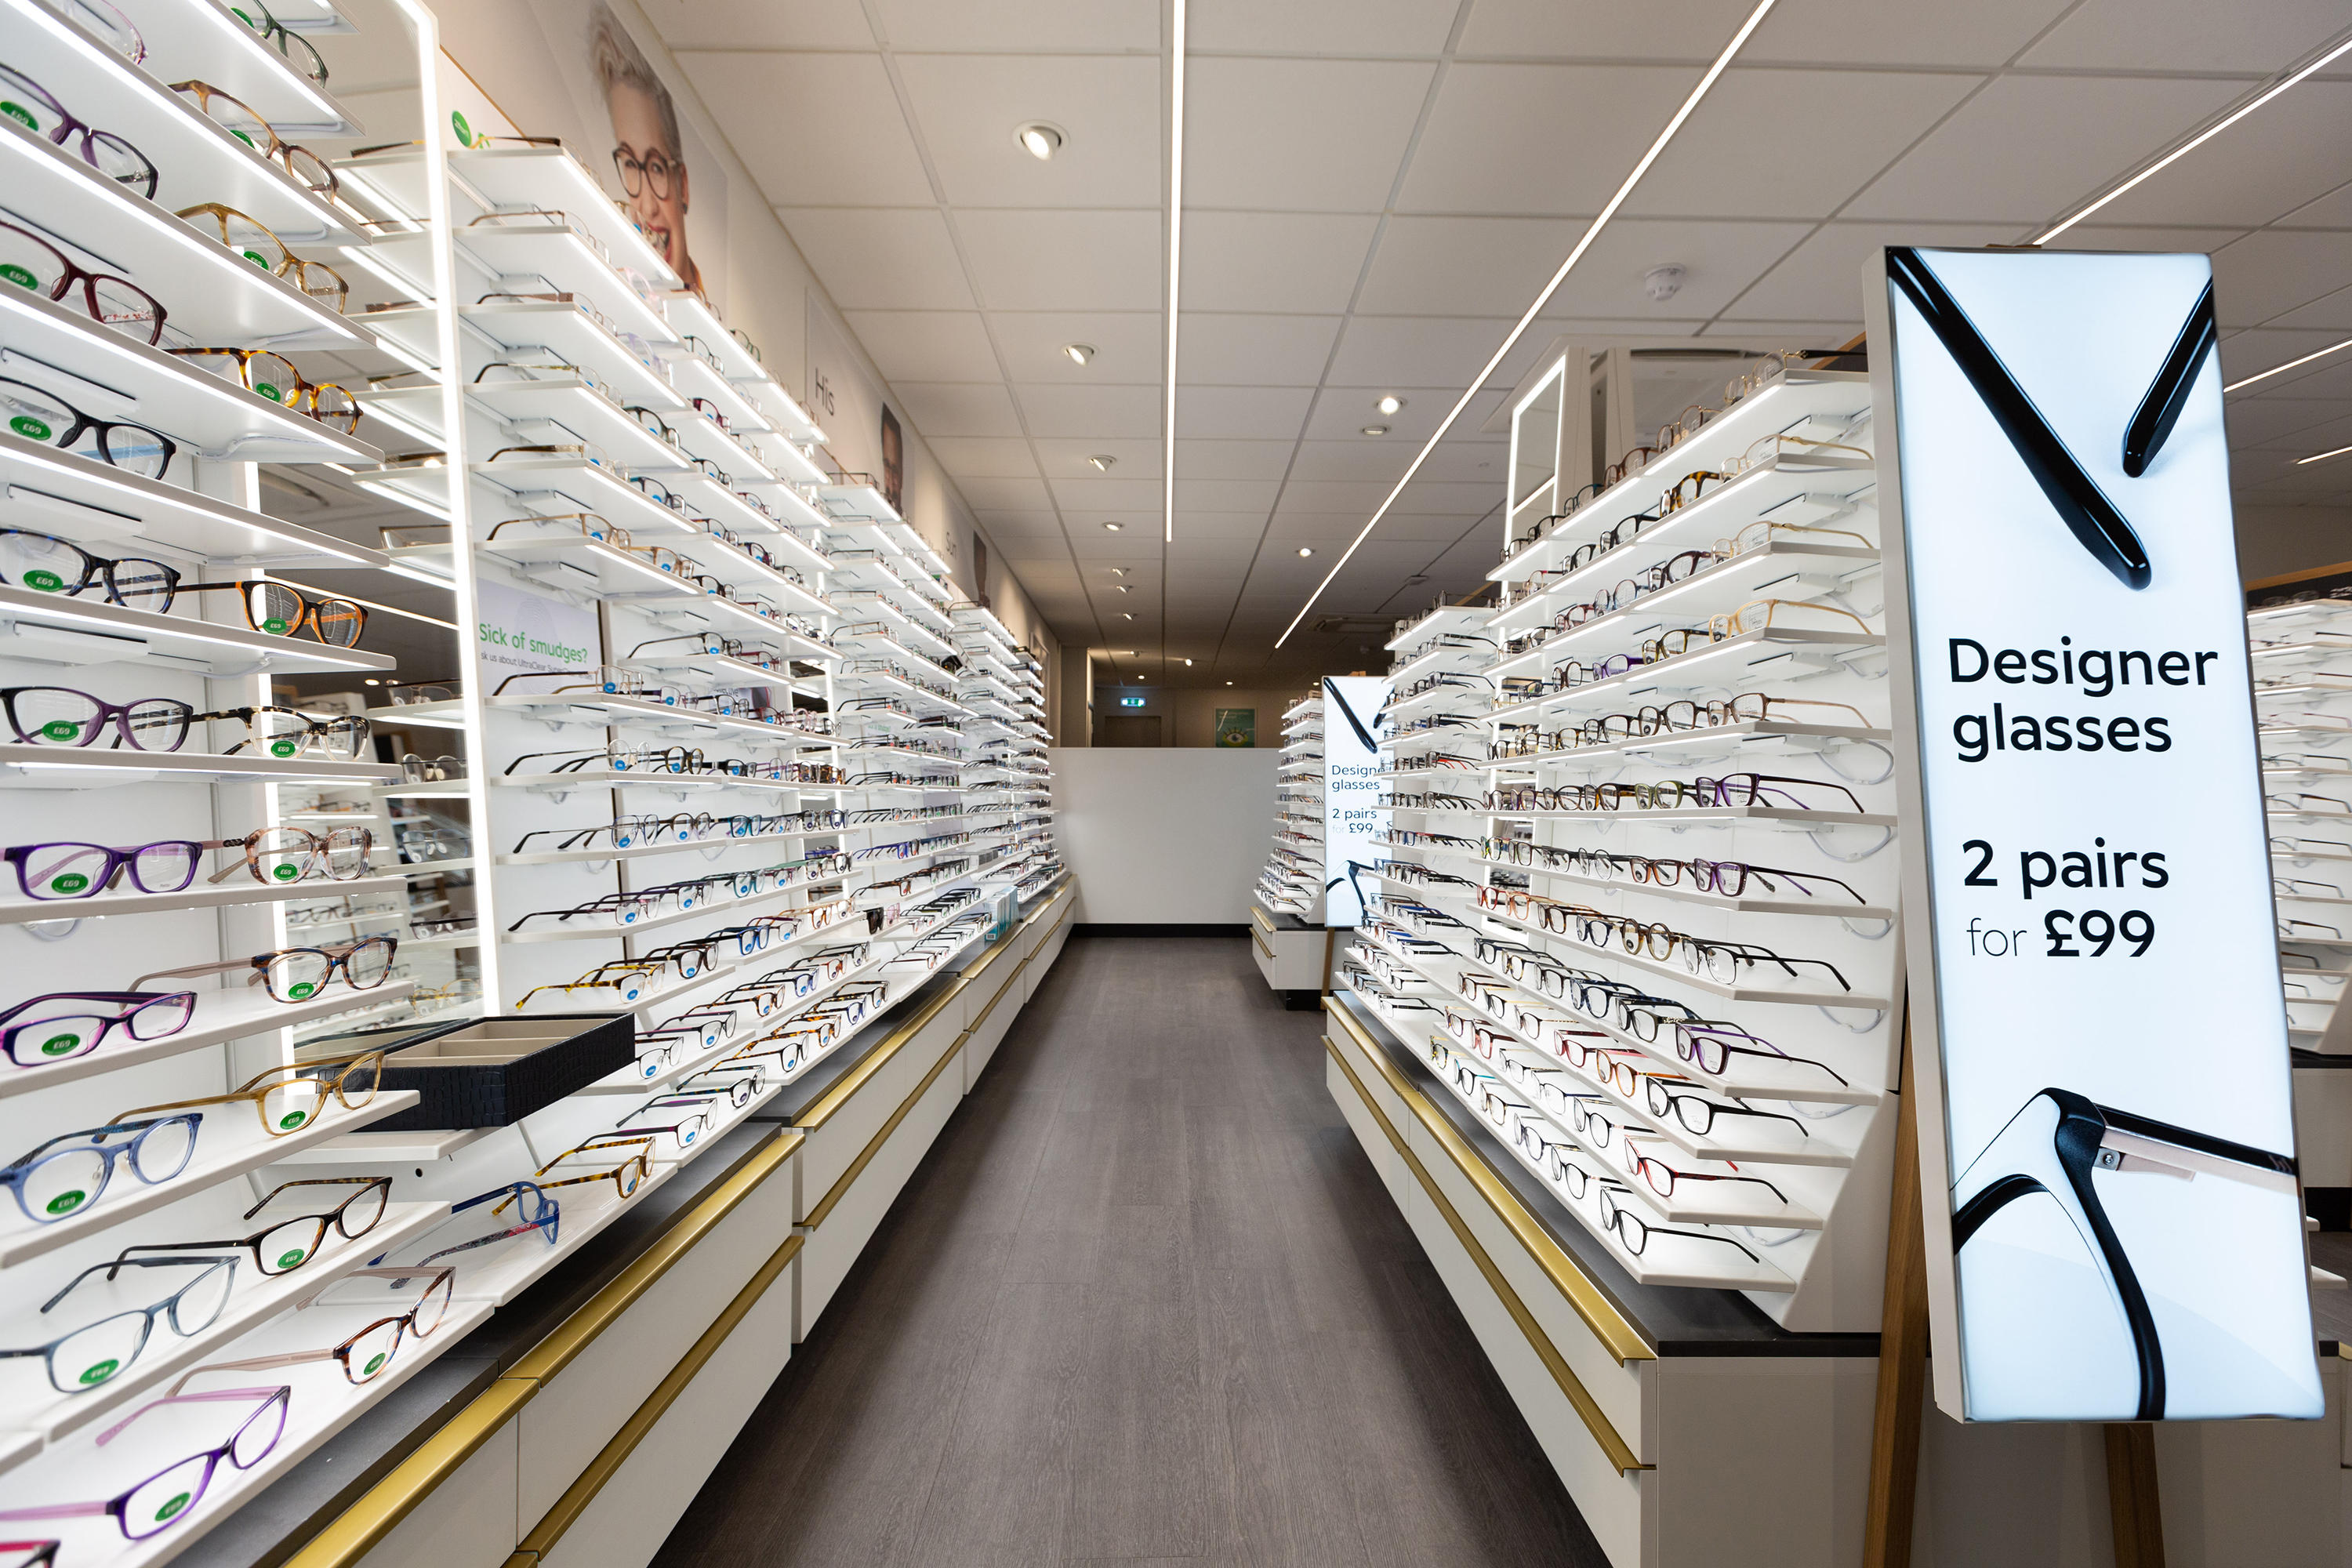 Images Specsavers Opticians and Audiologists - Dudley